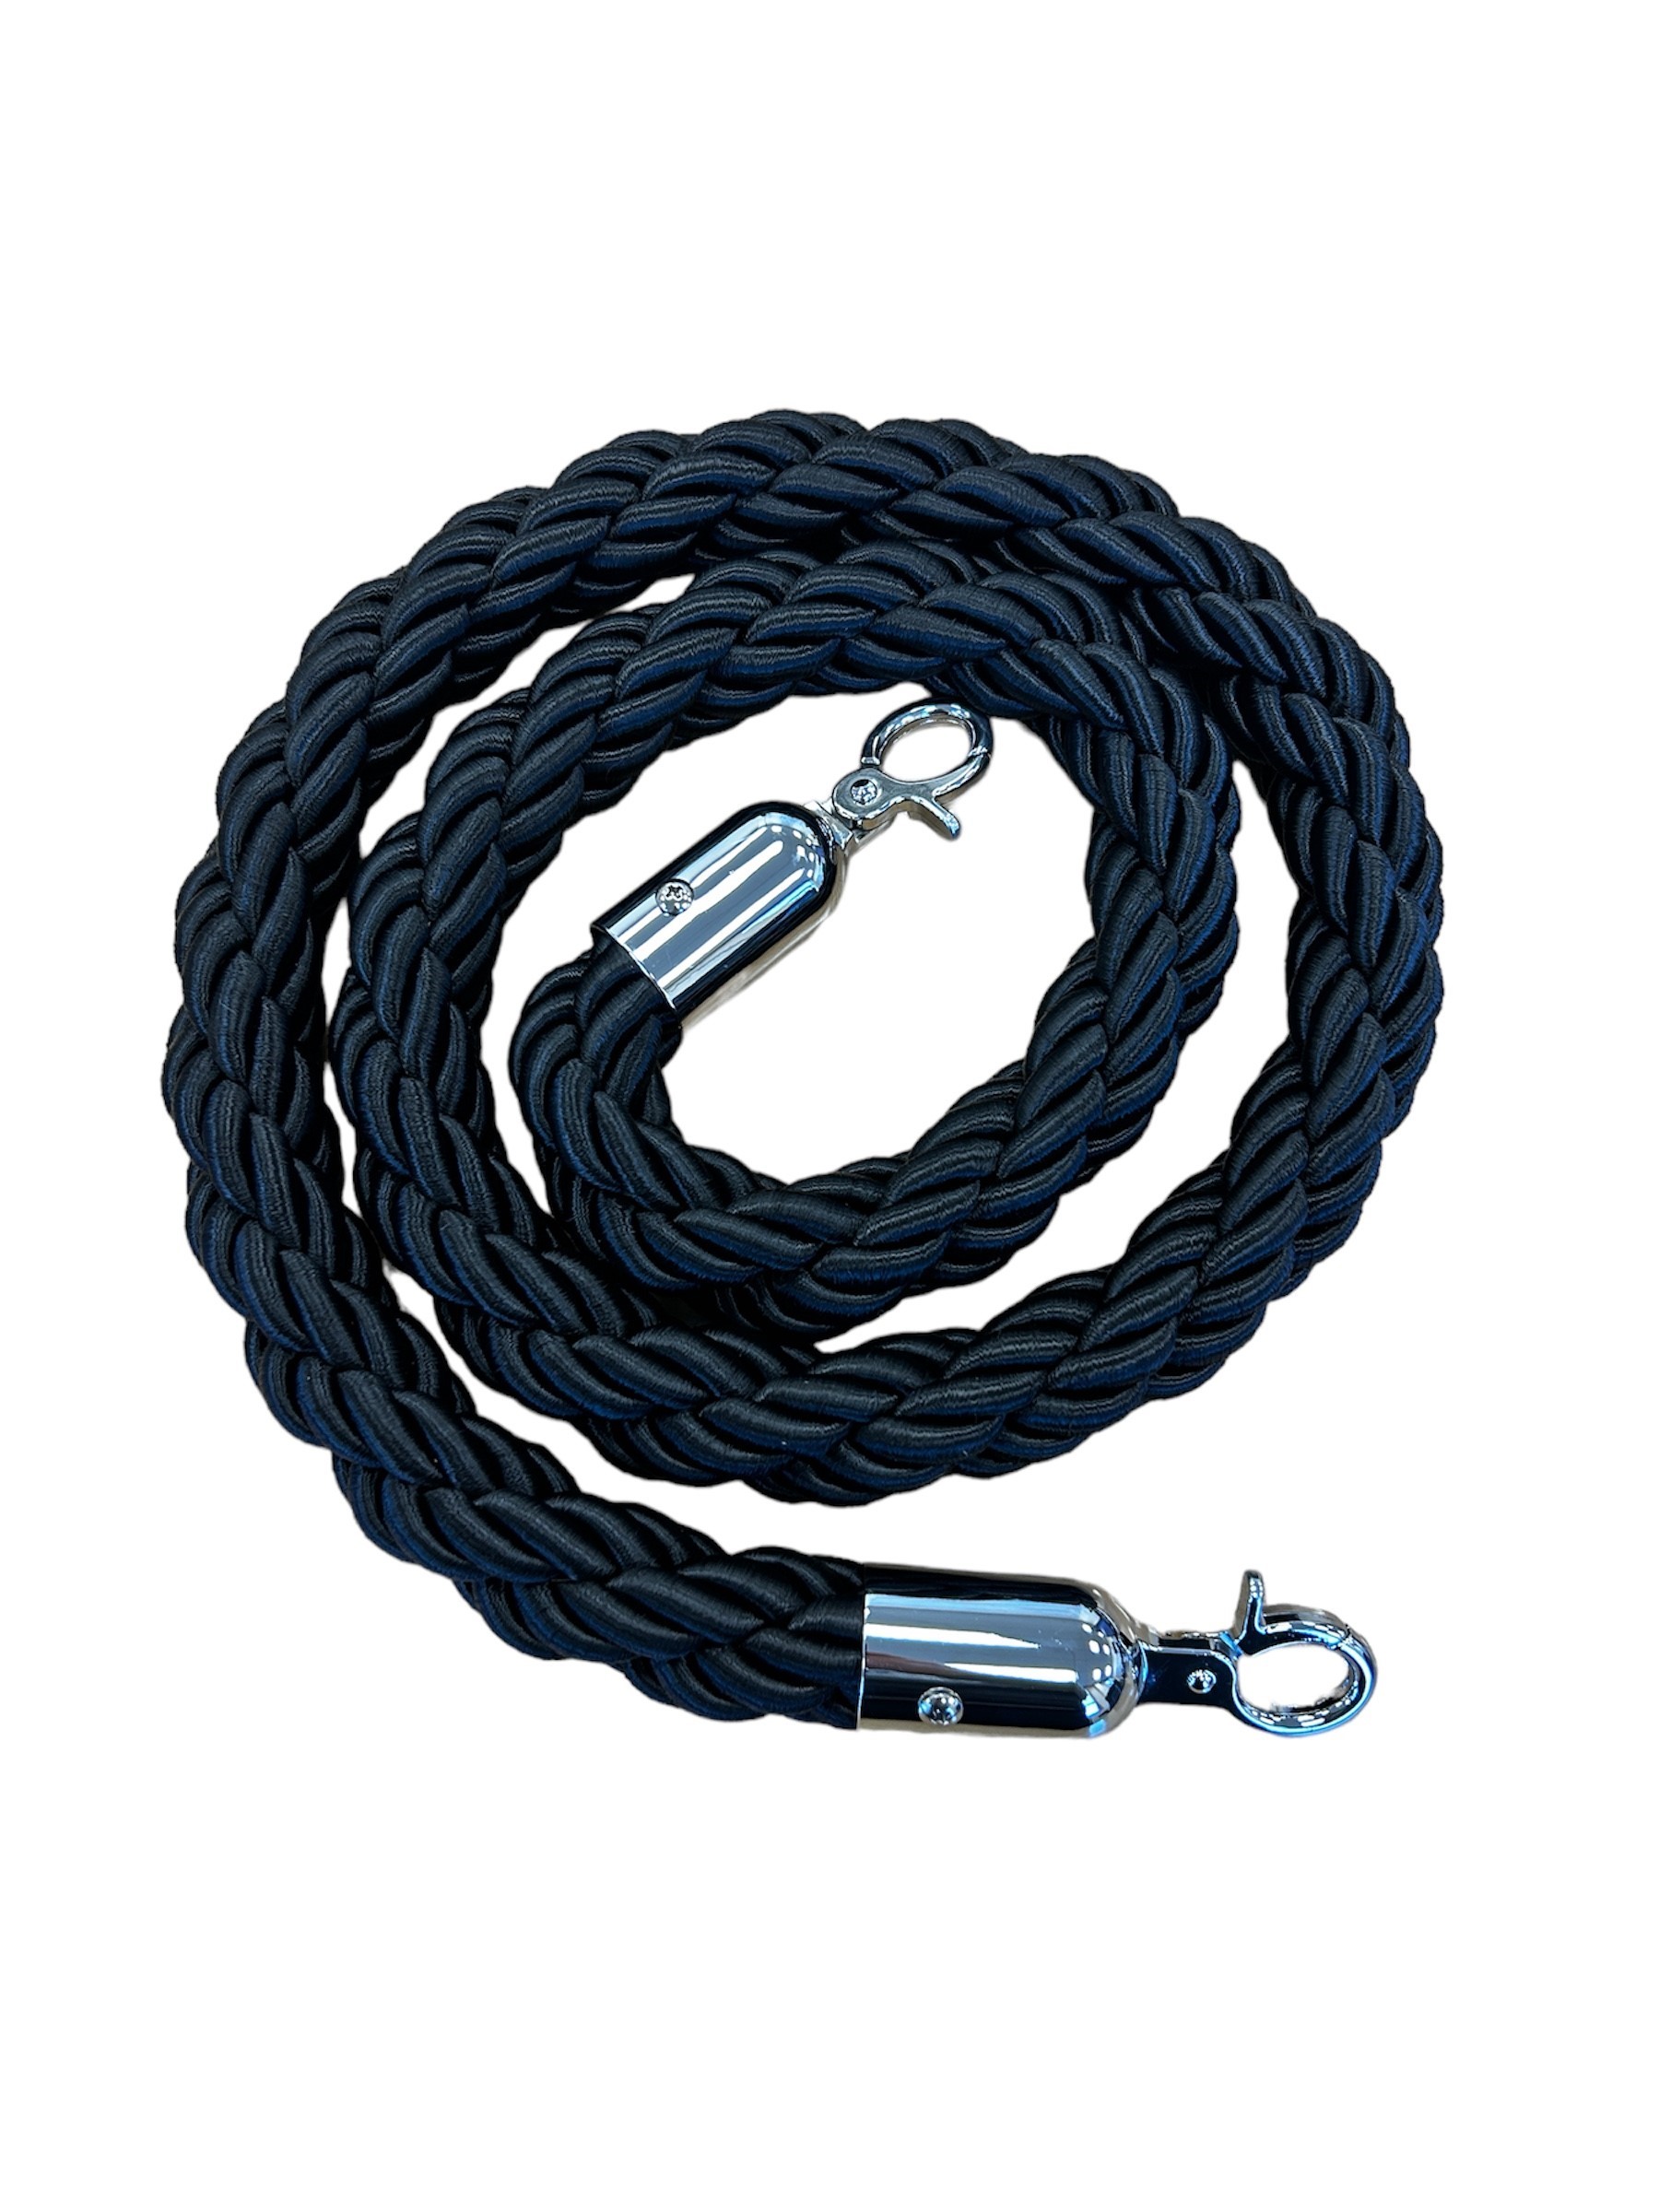 Black Braided Ropes - Silver Hook Ends - BE Furniture Sales